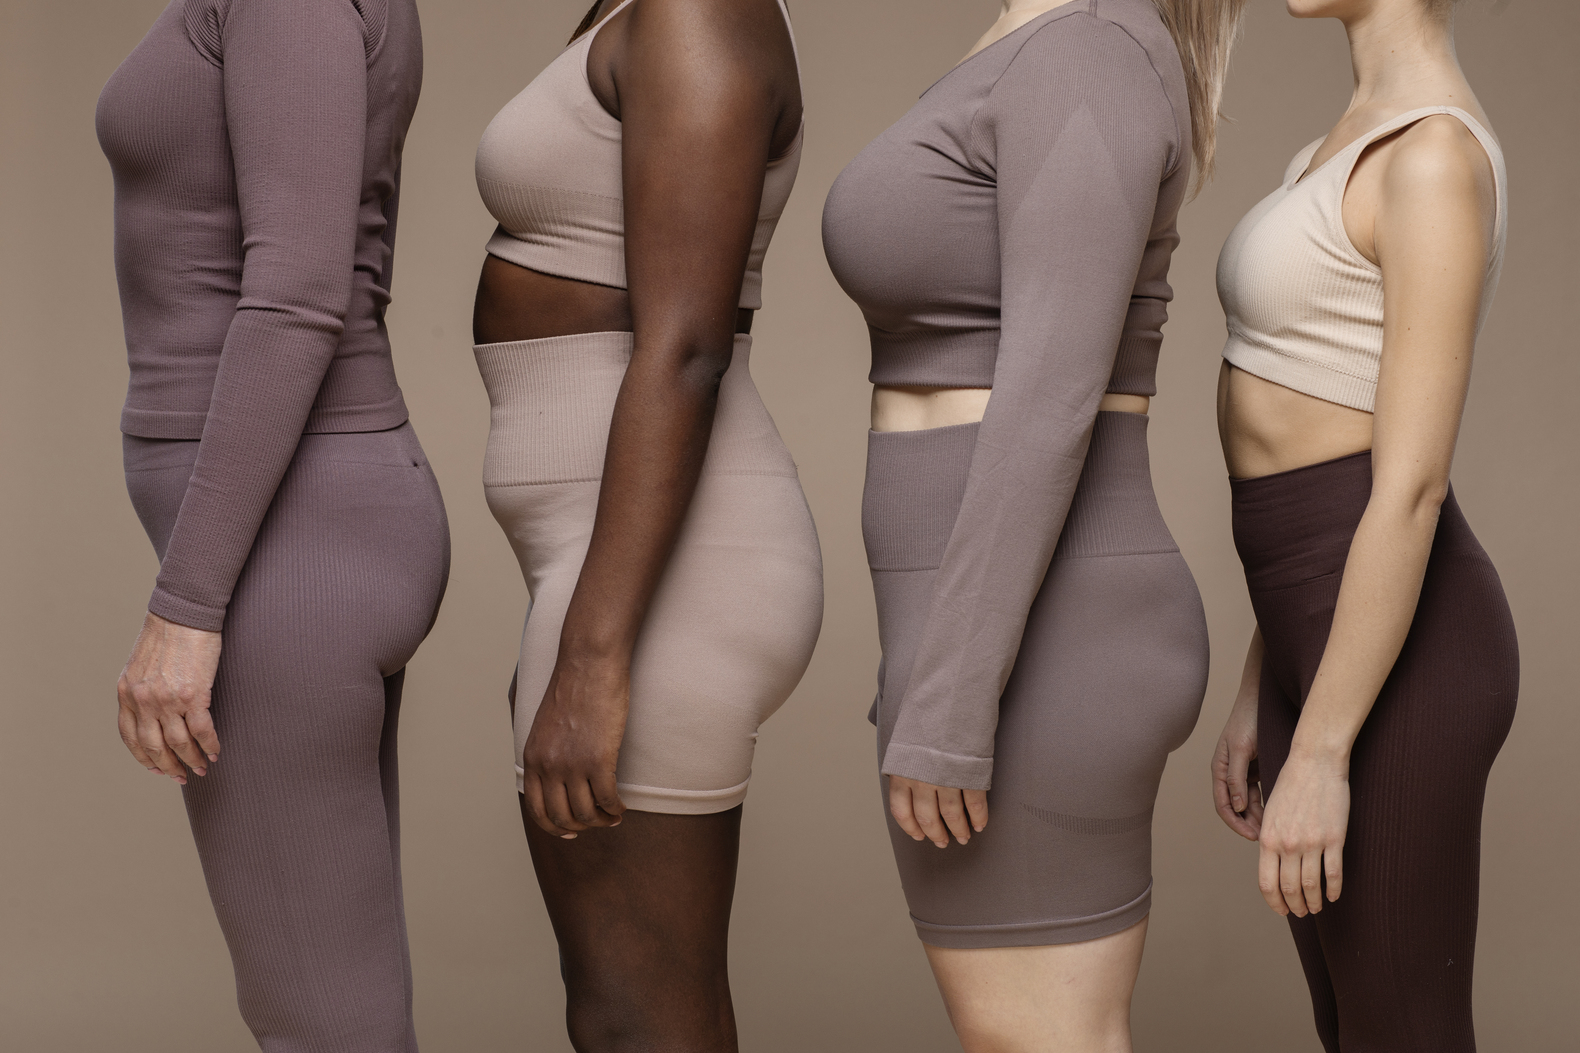 Shapewear has become a popular trending product to sell online for celebrities launching their own brands